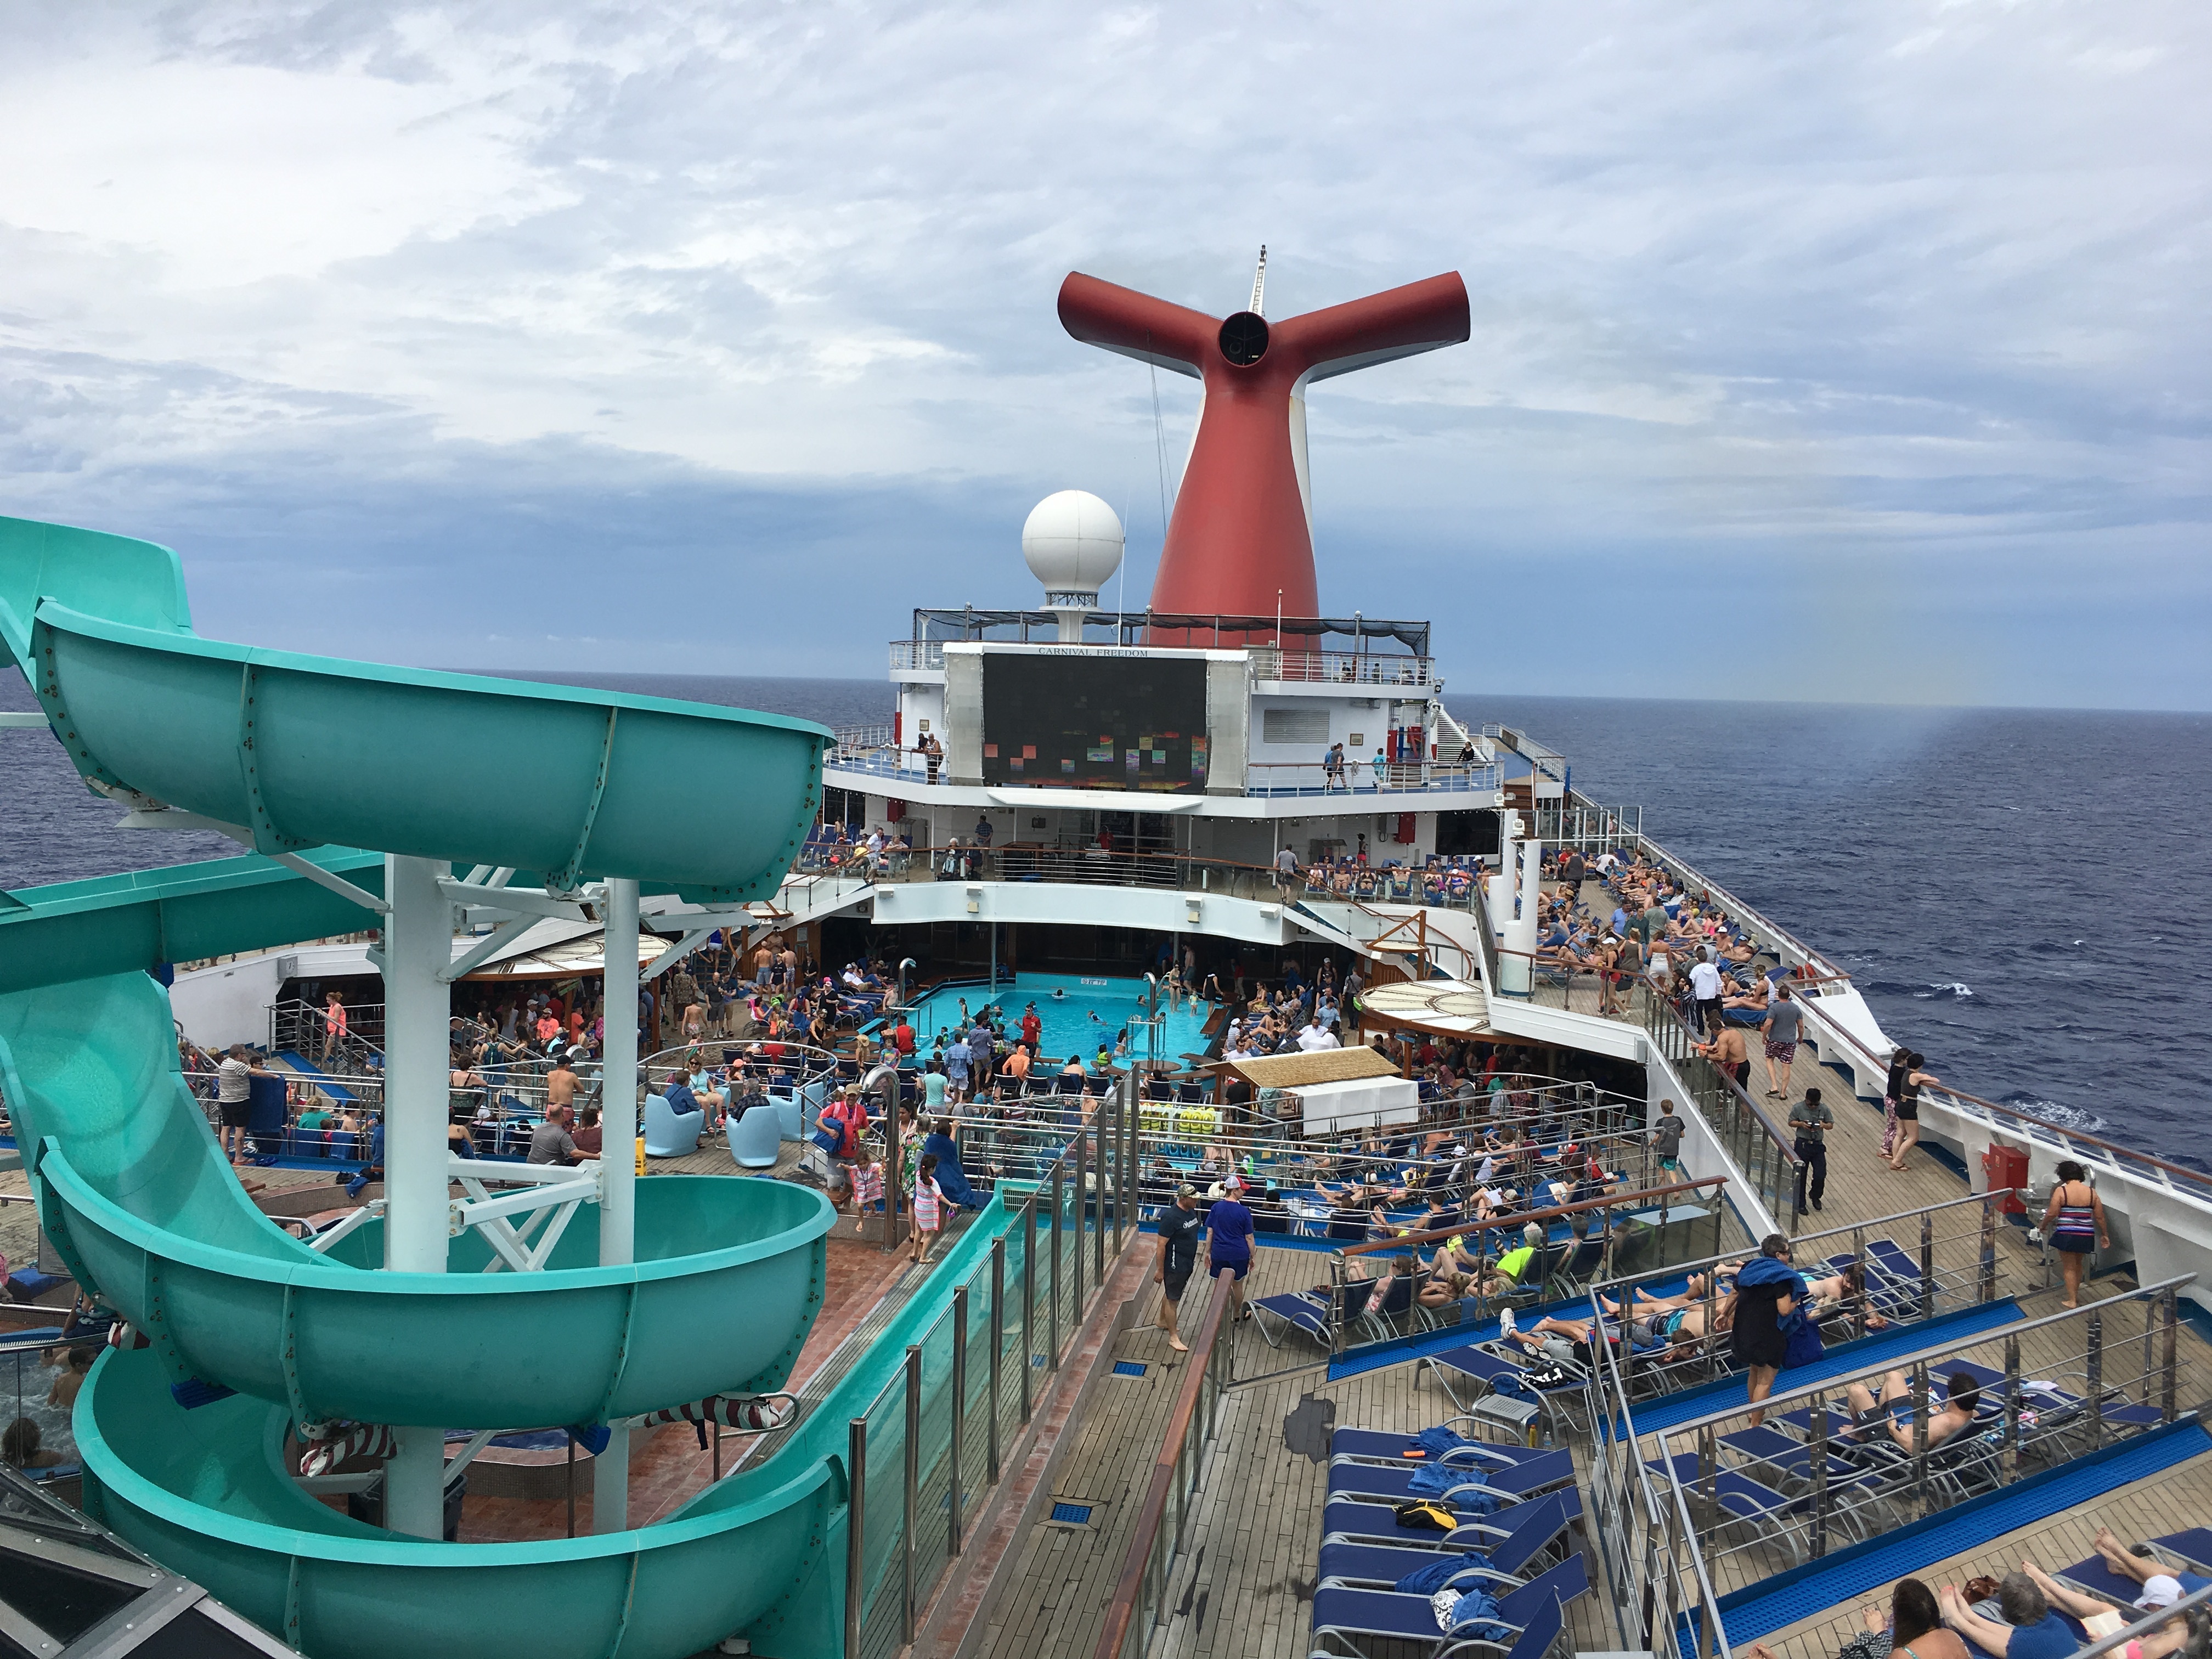 carnival cruise review email